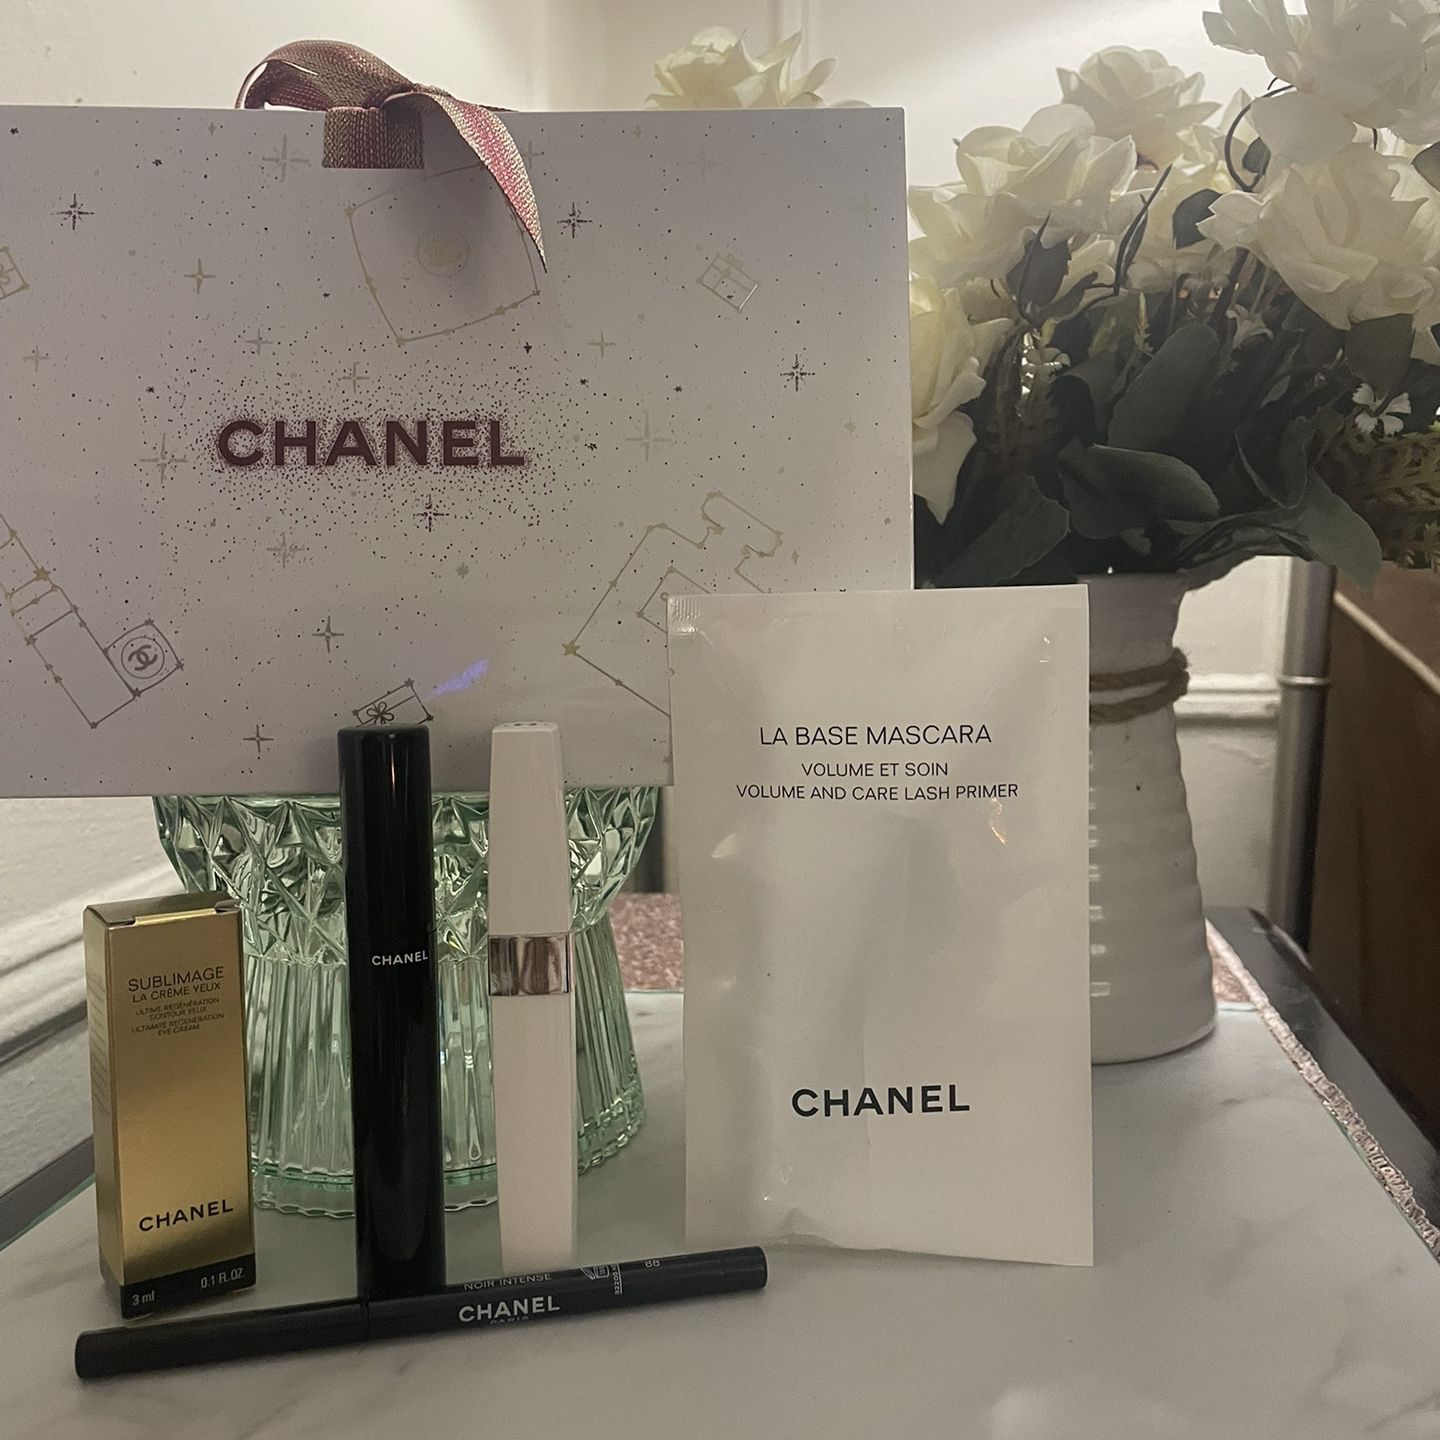 Chanel Mascara Cosmetics Set for Sale in Garden City South, NY - OfferUp